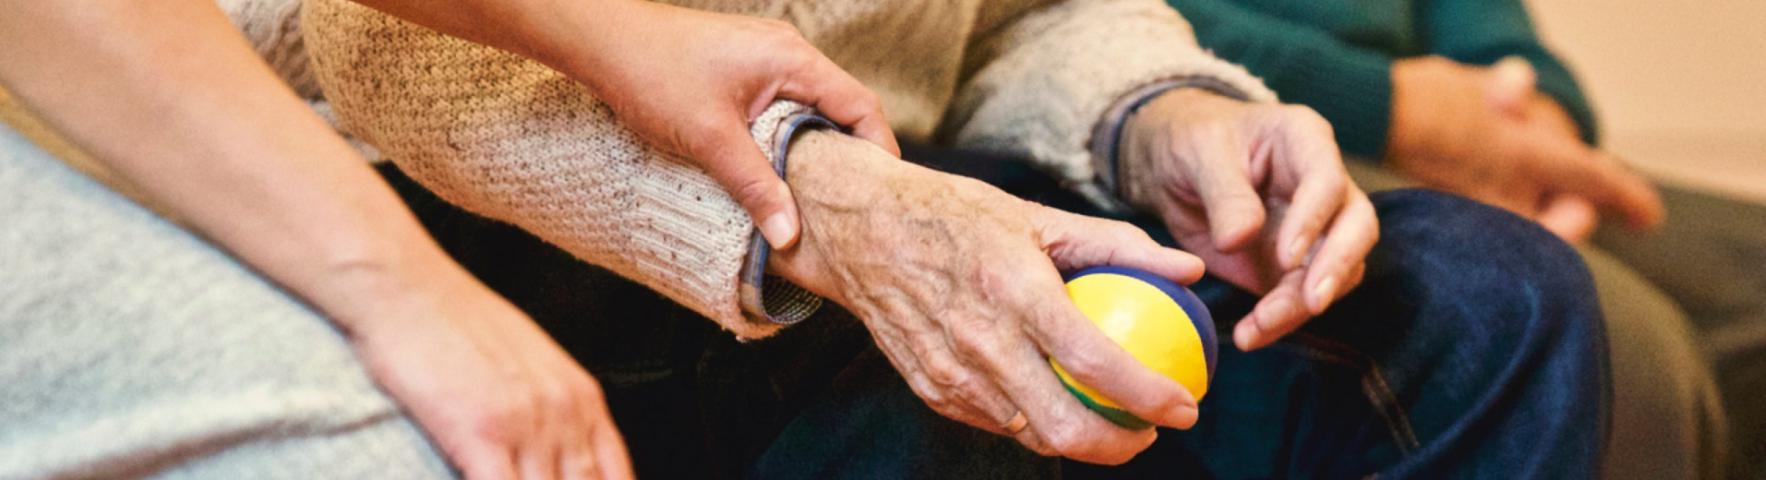 Close up of holding hands a younger person and an older person holding a ball.